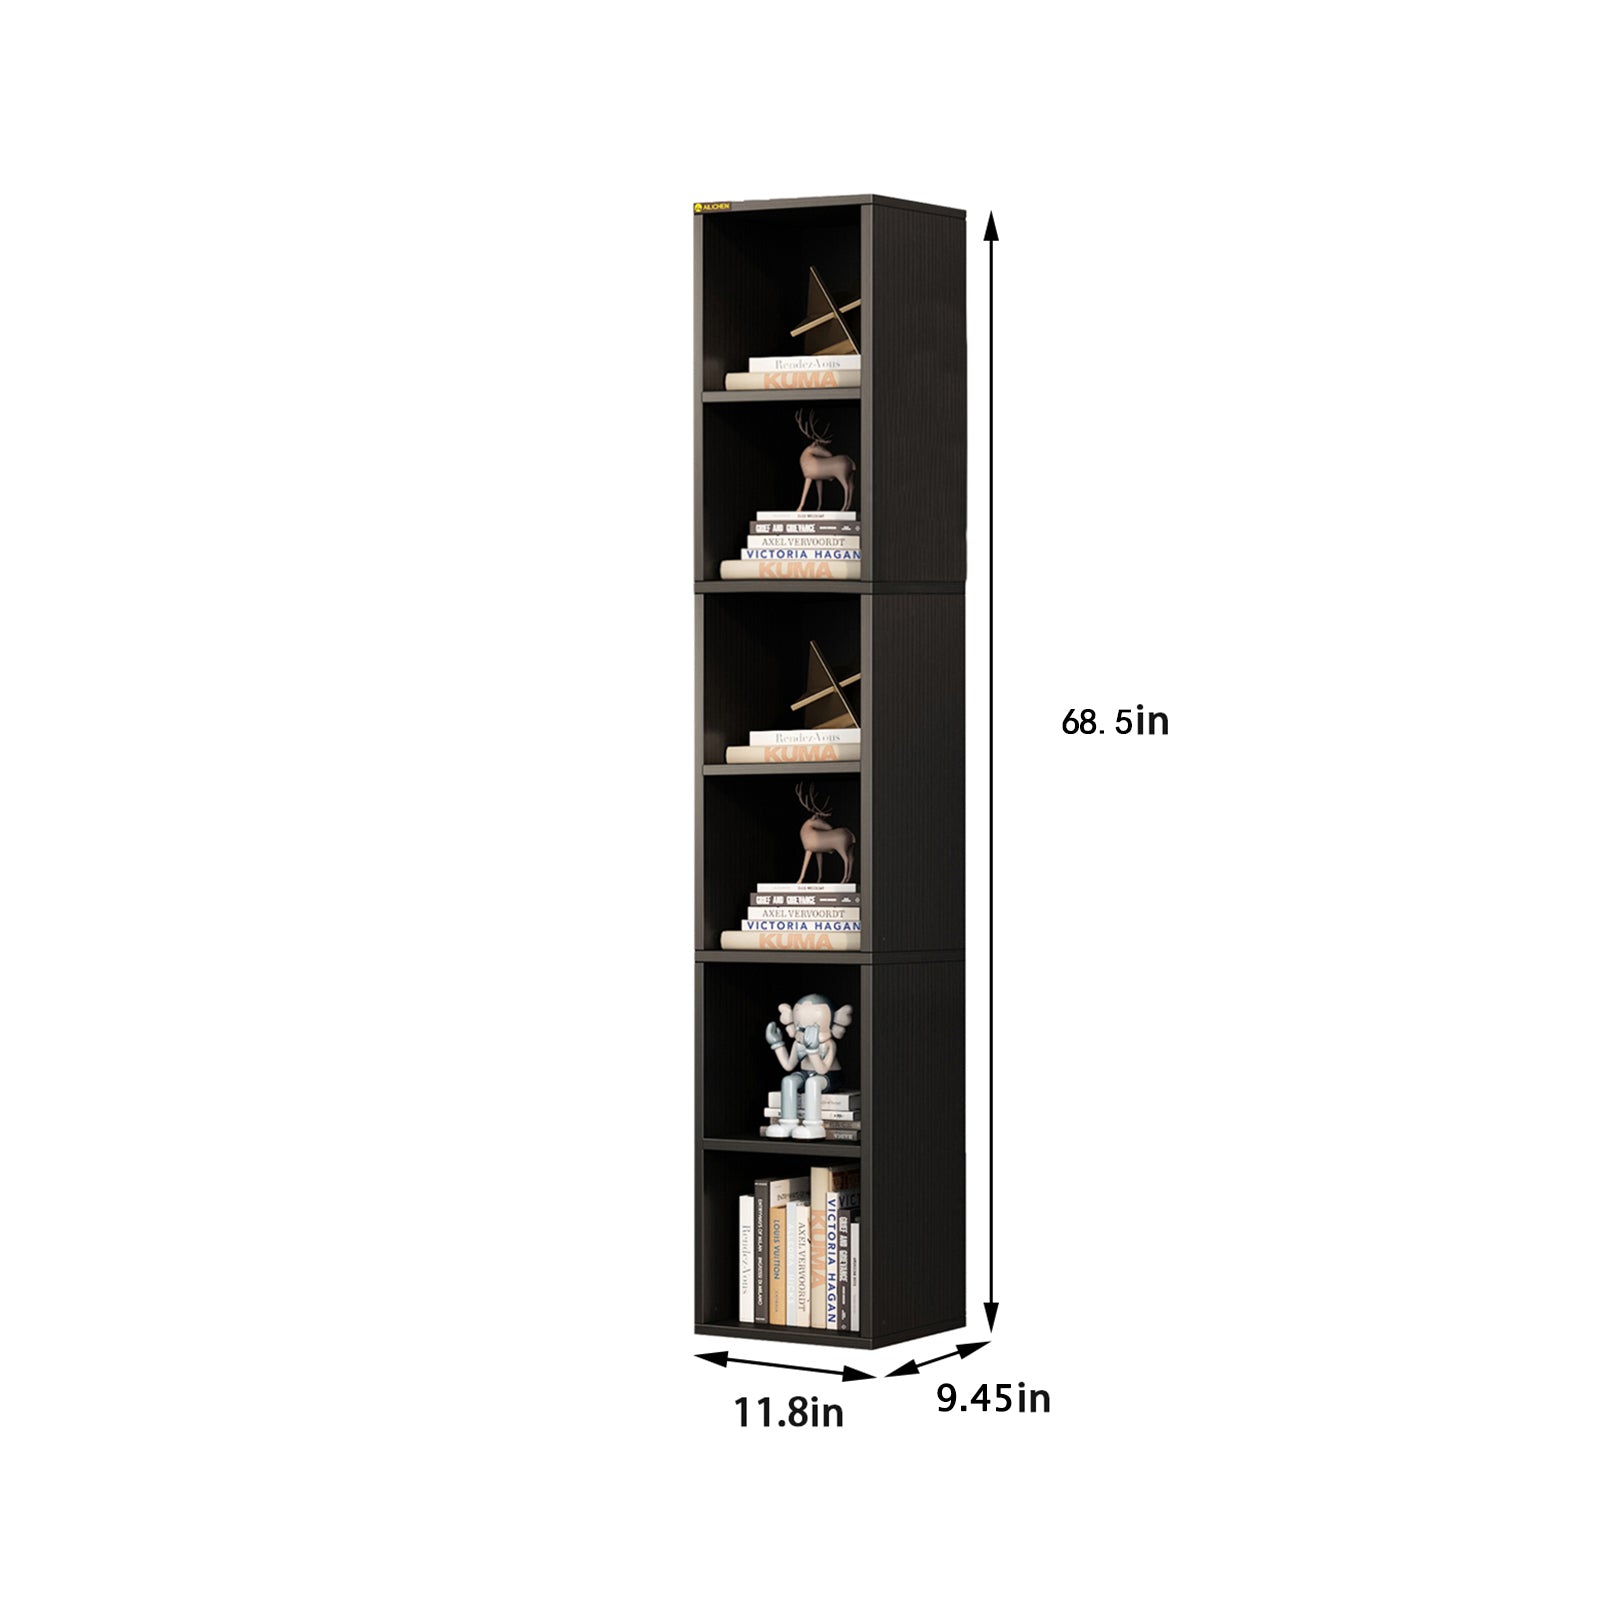 6-Cube Closet Storage Shelves for Home Office Kids Room size introduction